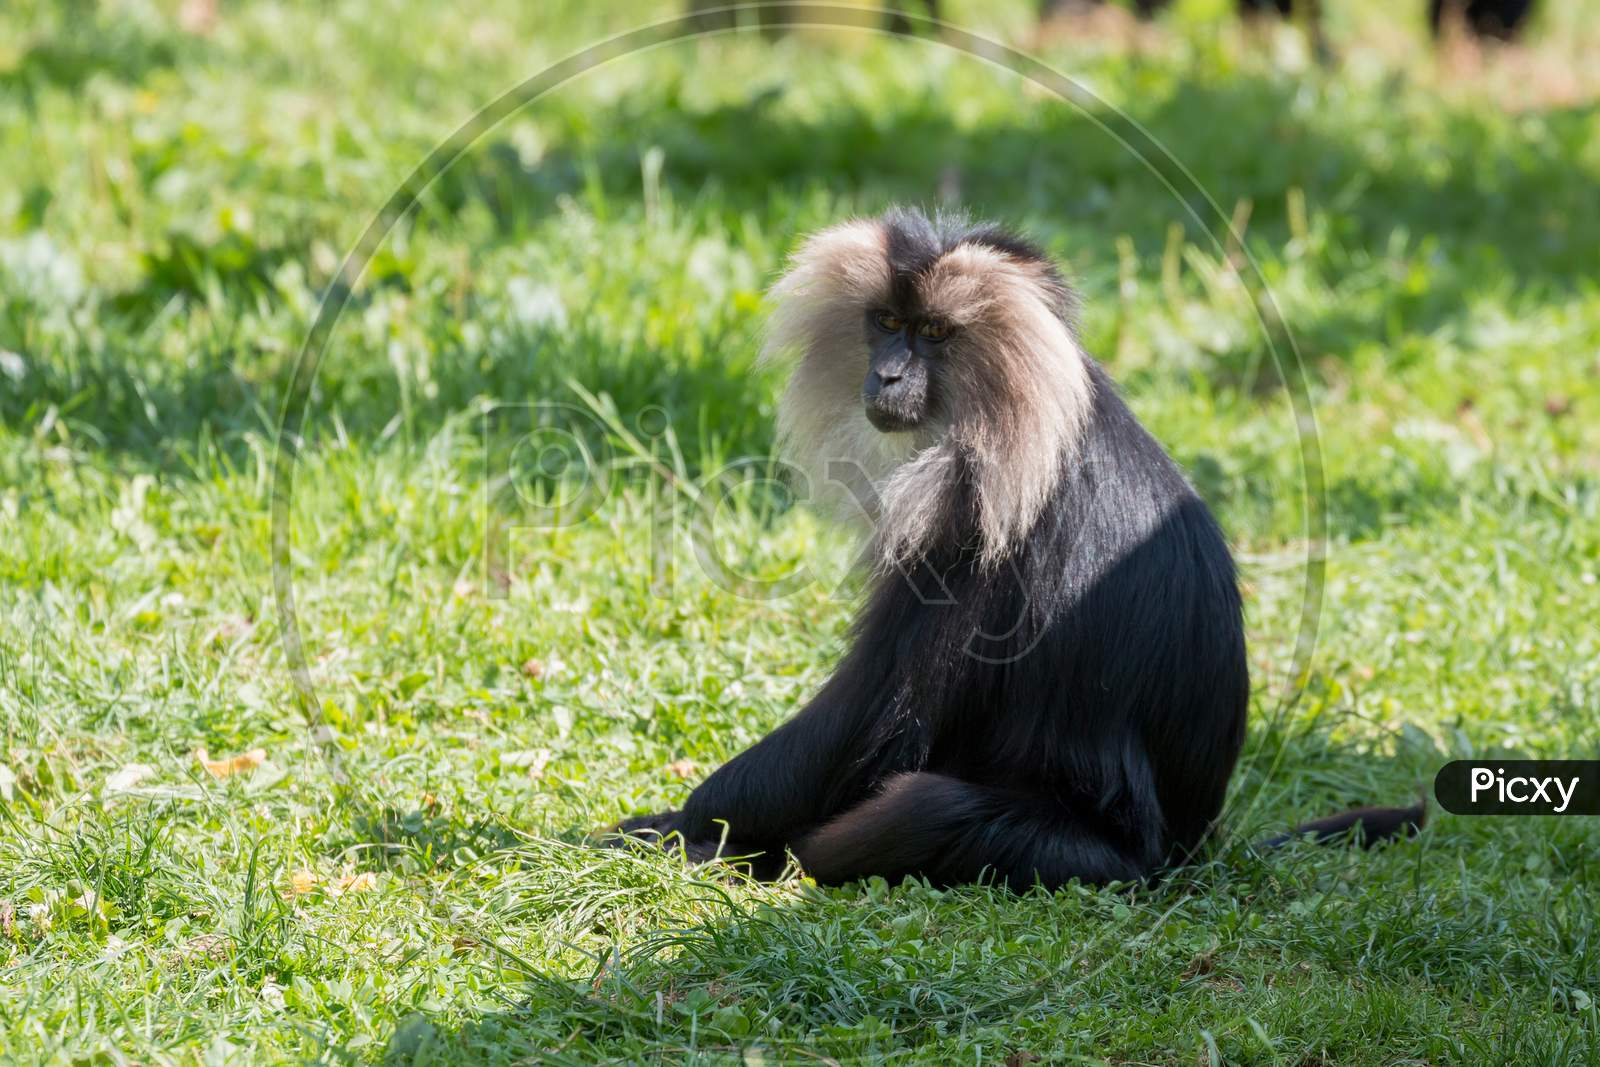 Lion-Tailed Macaque (Macaca Silenus) Sitting On The Grass In The Sunshine